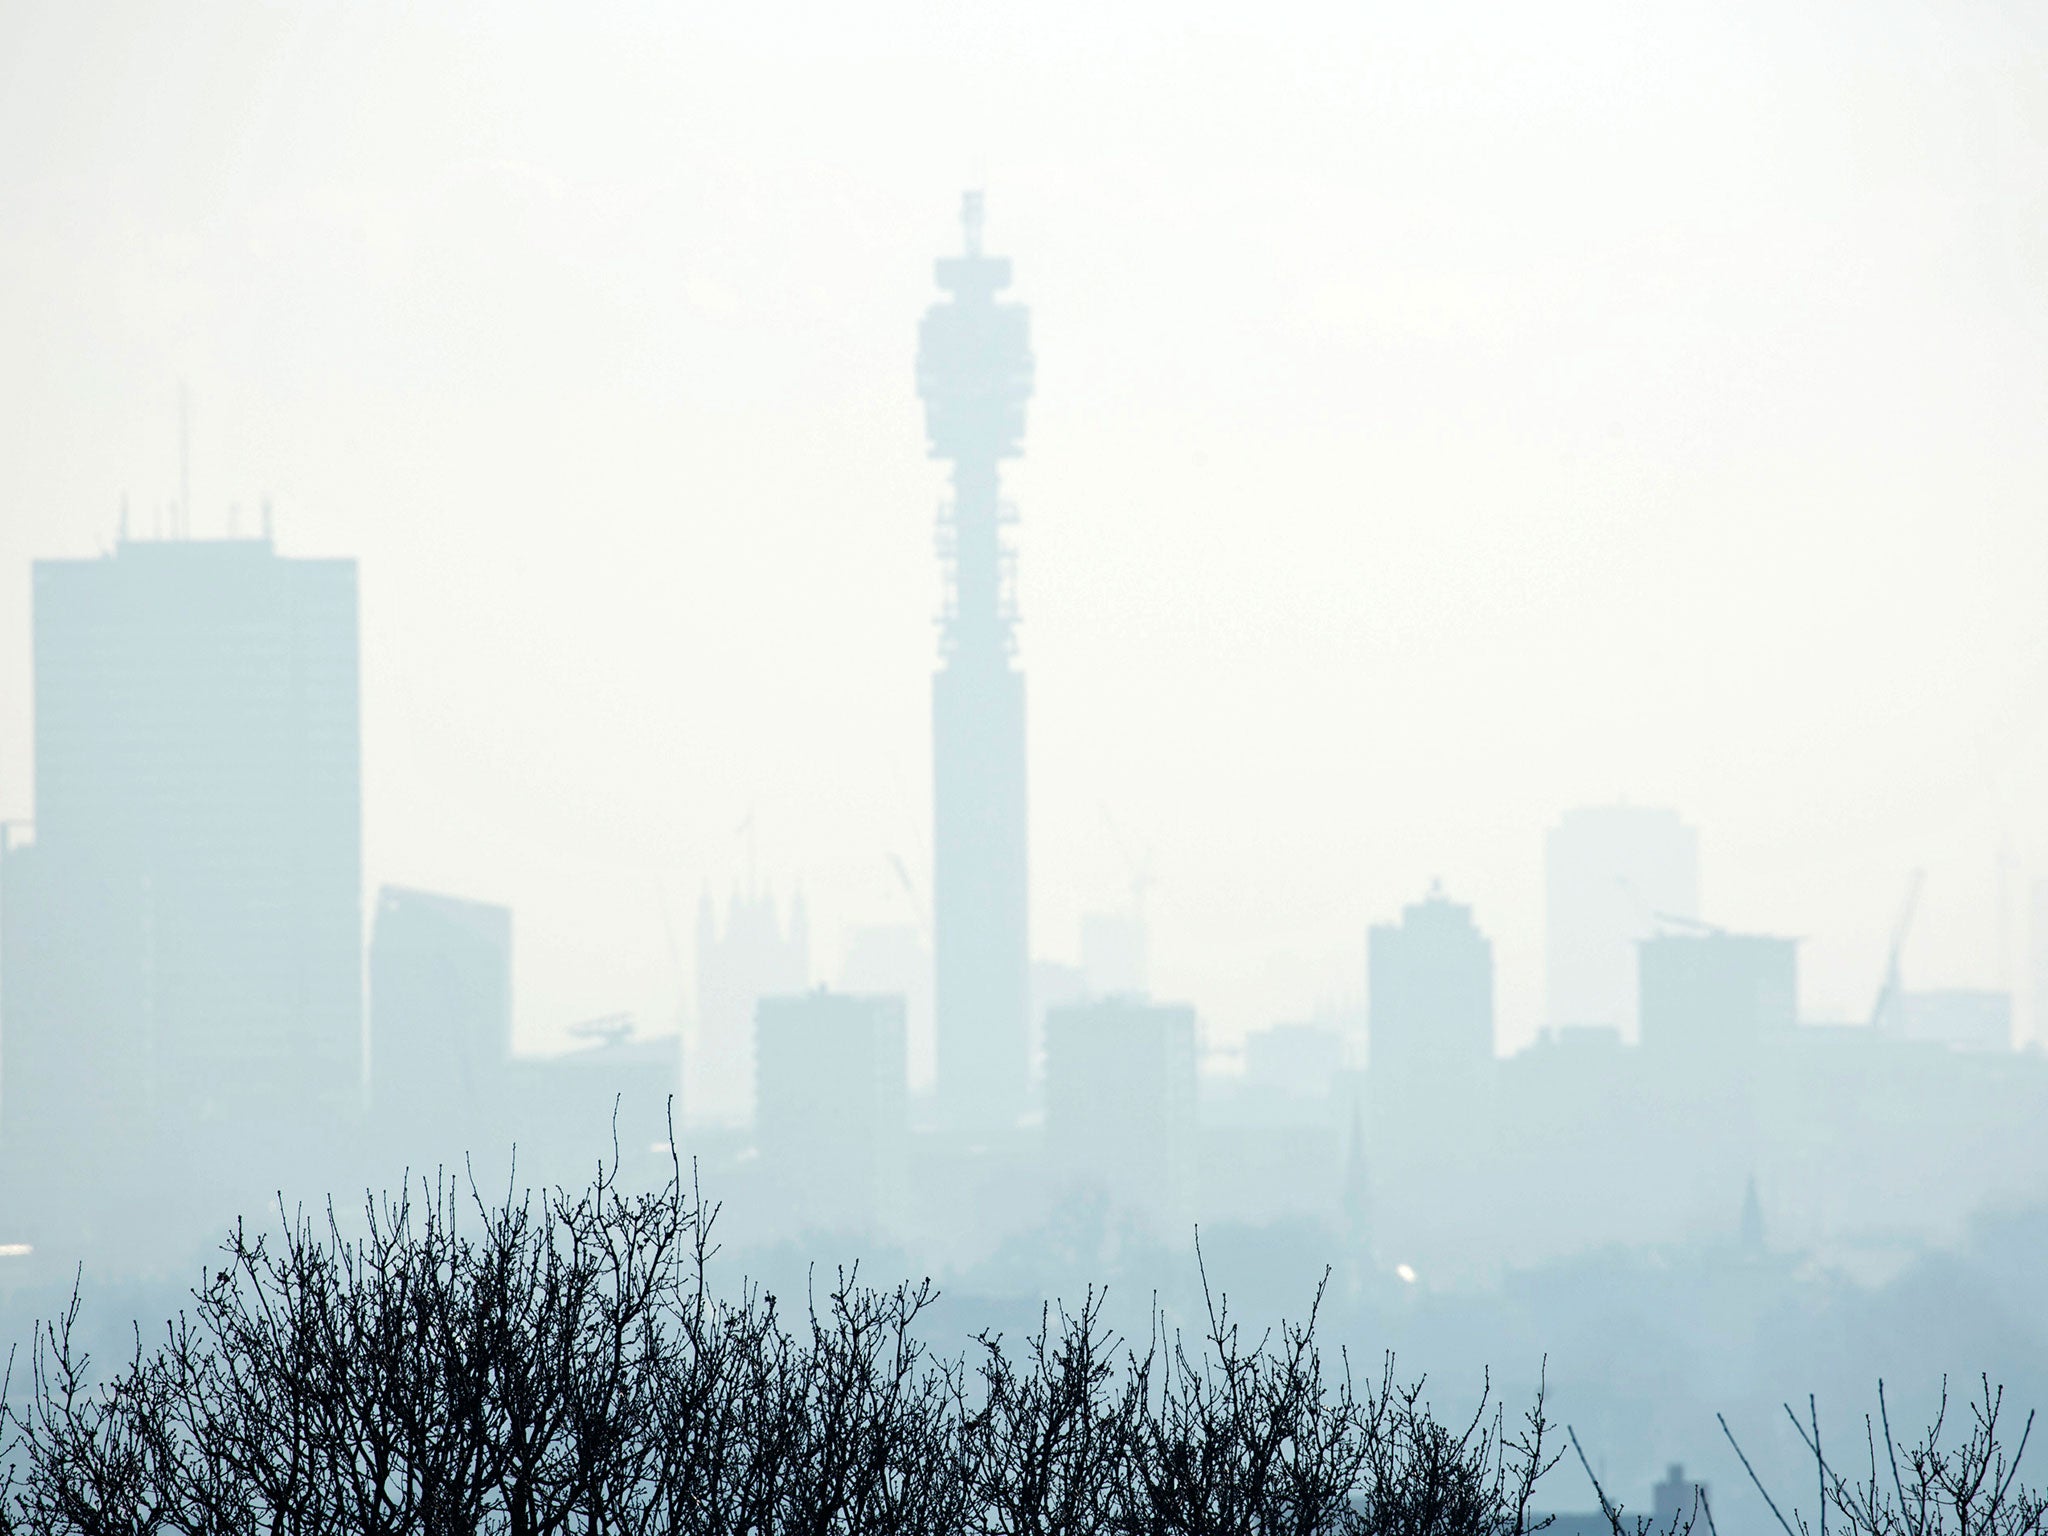 Smog, blamed for the early deaths of thousands of Londoners, shrouds the city